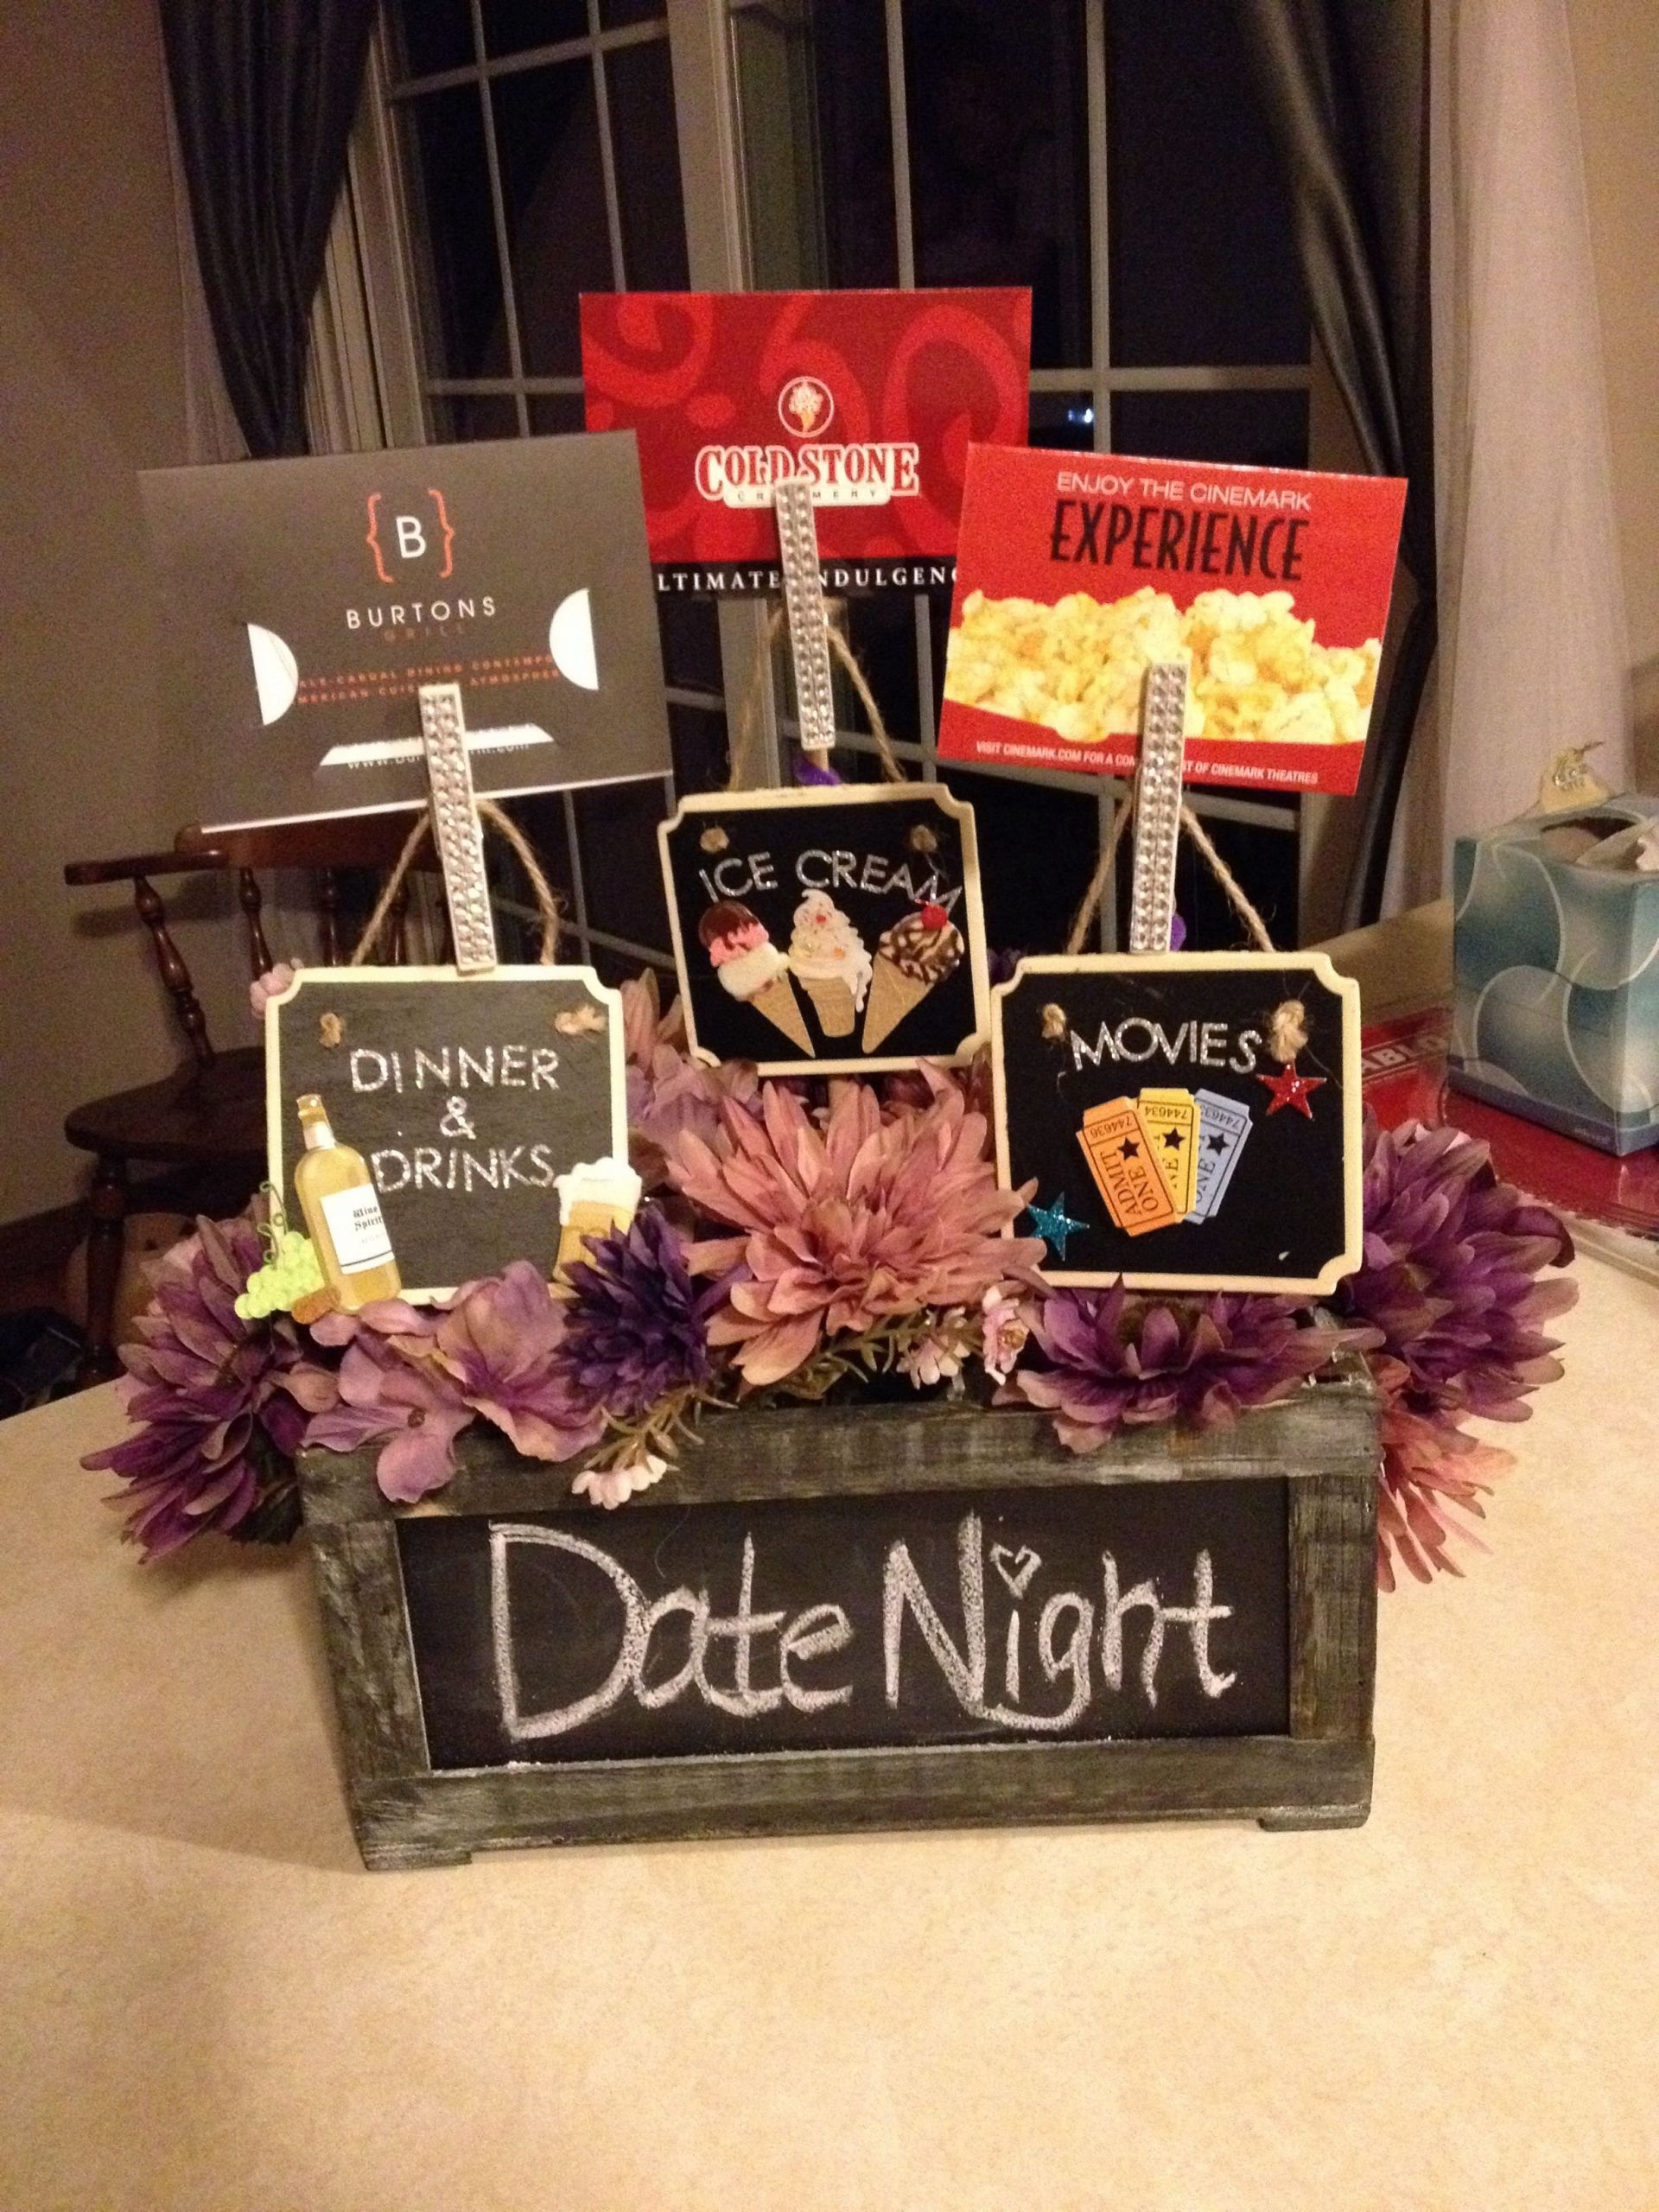 Themed Gift Basket Ideas For Auctions
 10 Best Date Night Gift Basket Ideas 2020